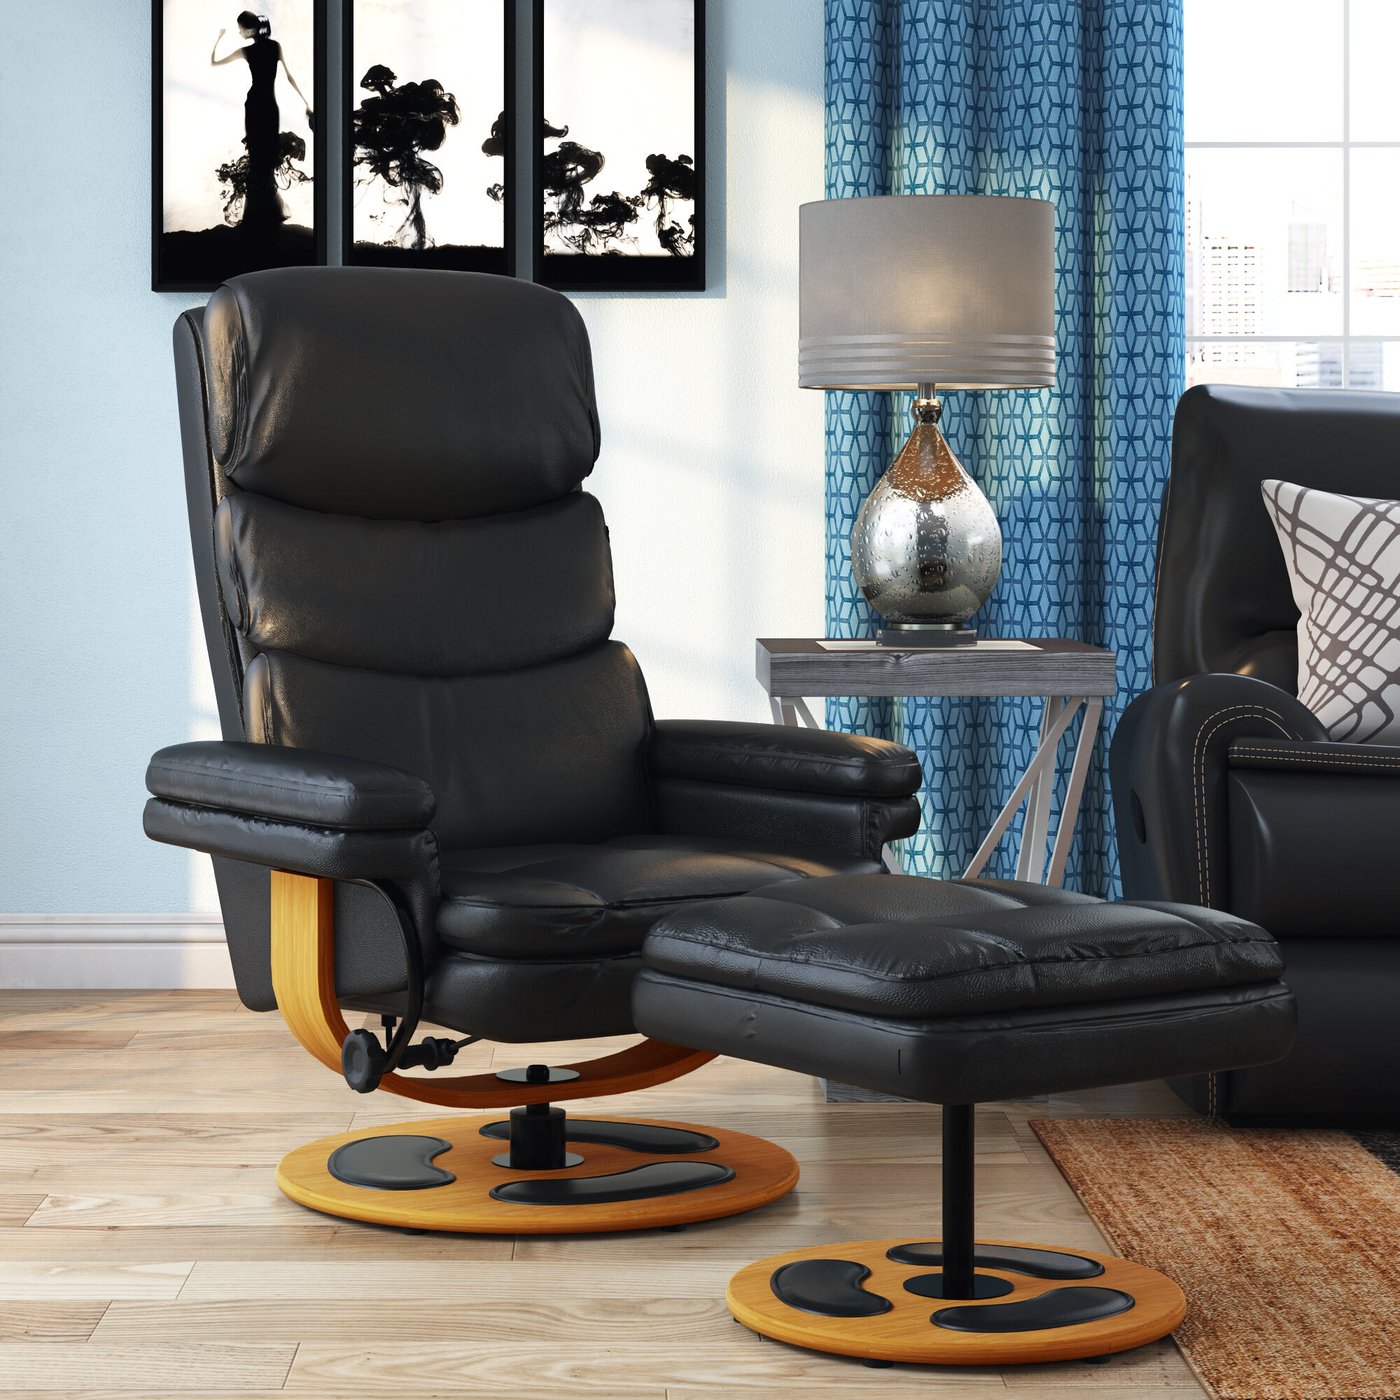 The Only Recliner Buying Guide You Ever Need To Read - VisualHunt